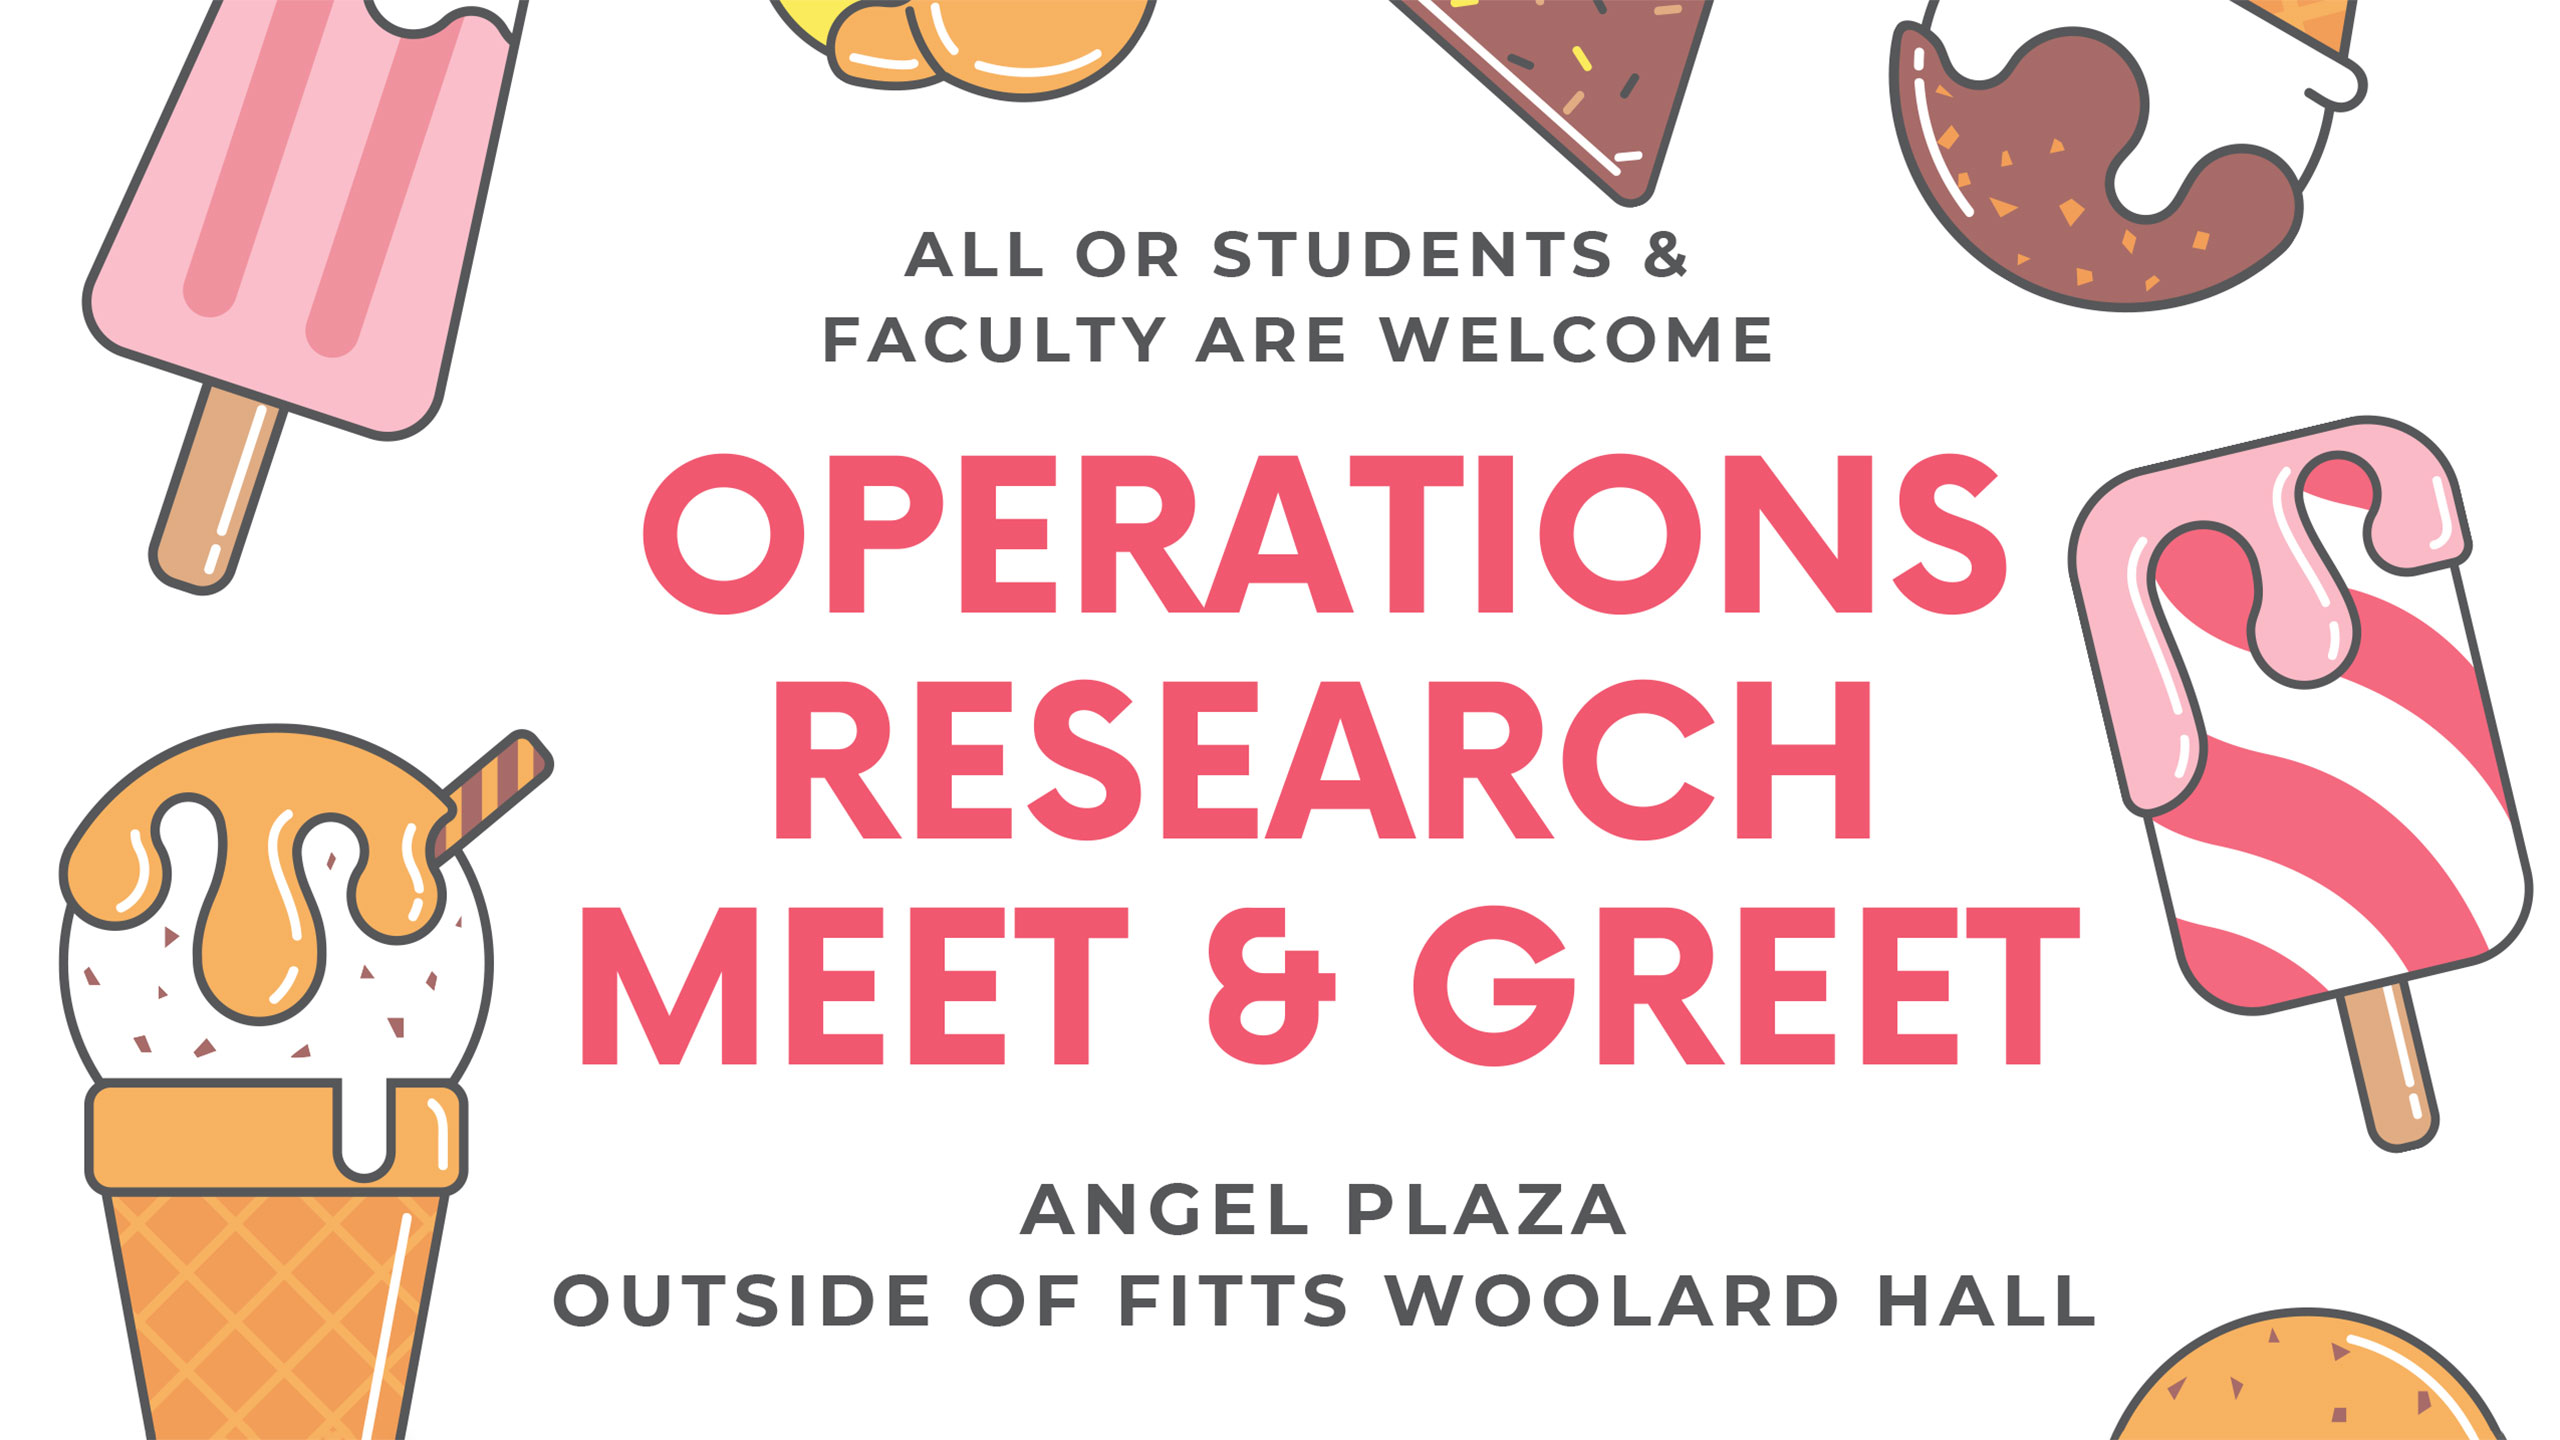 OR meet and greet in Angel Plaza outside of Fitts-Woolard Hall